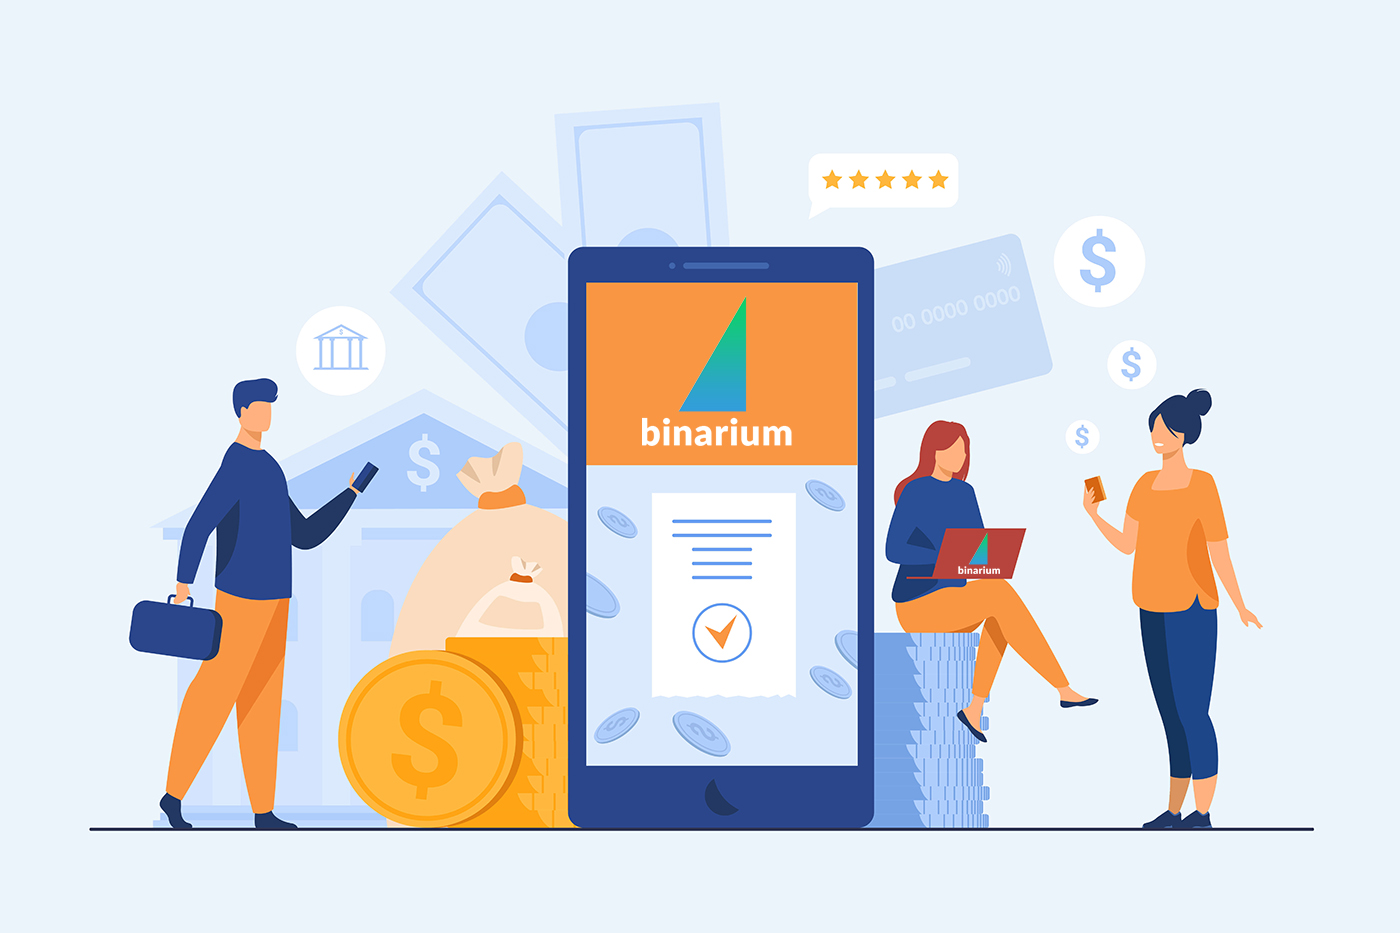 How to Withdraw and Make a Deposit Money in Binarium